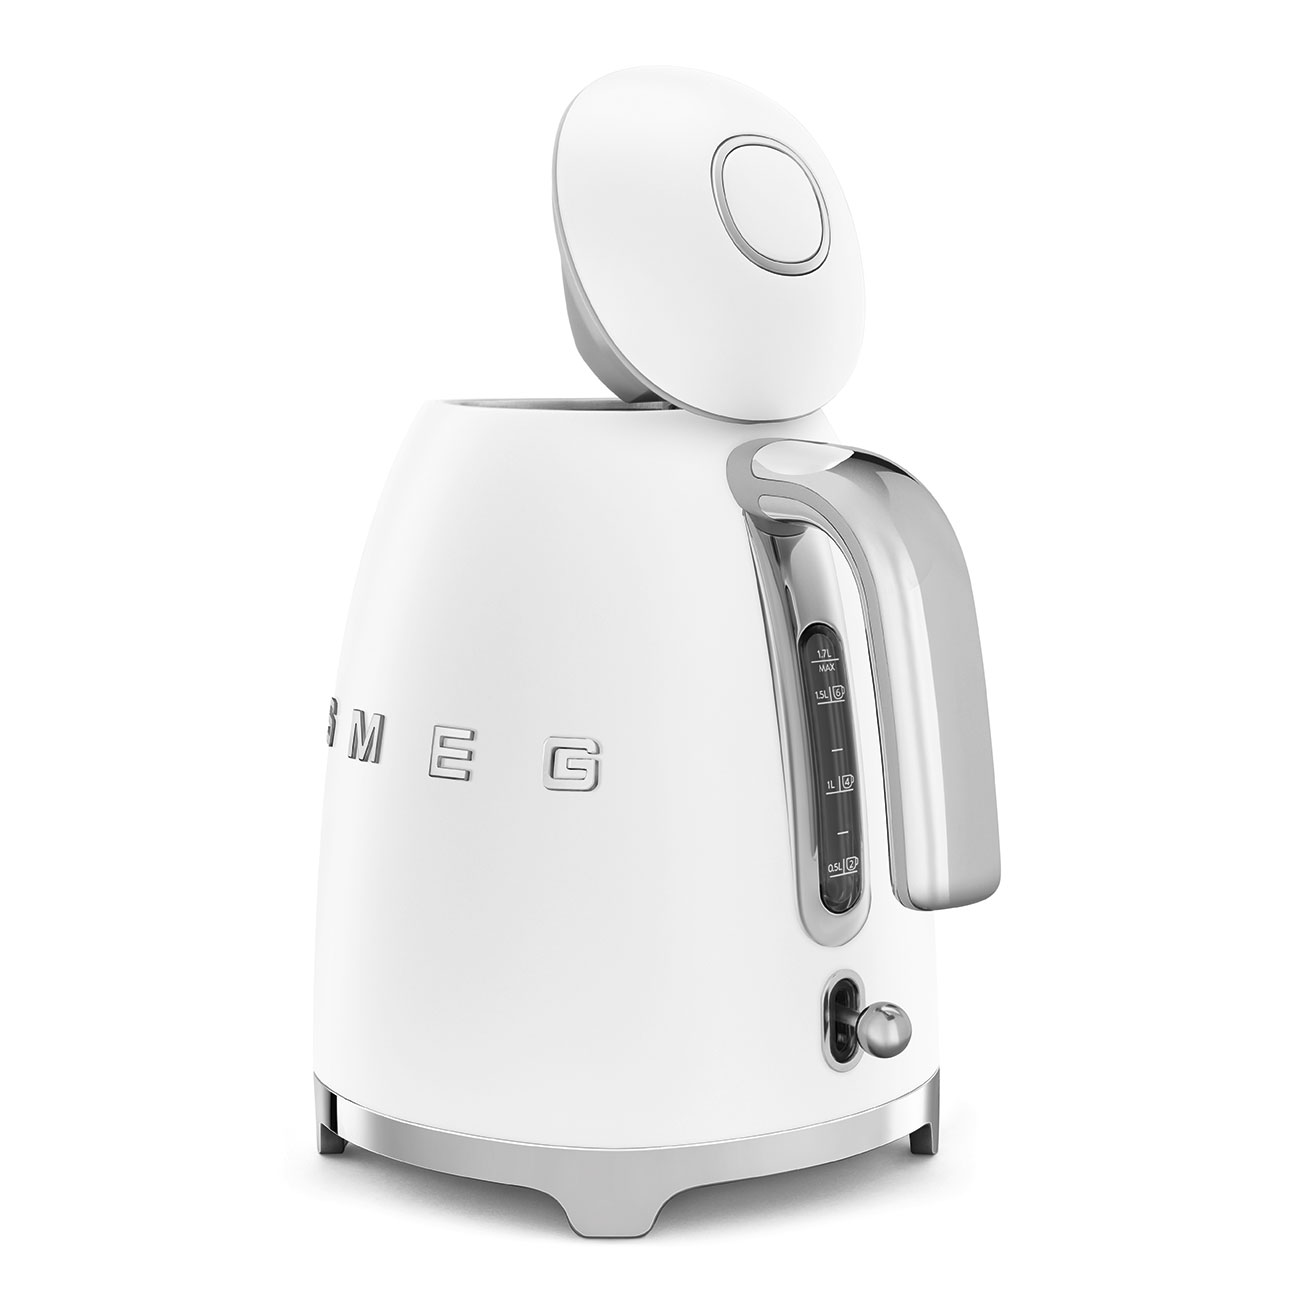 Electric kettle White KLF03WHMUS